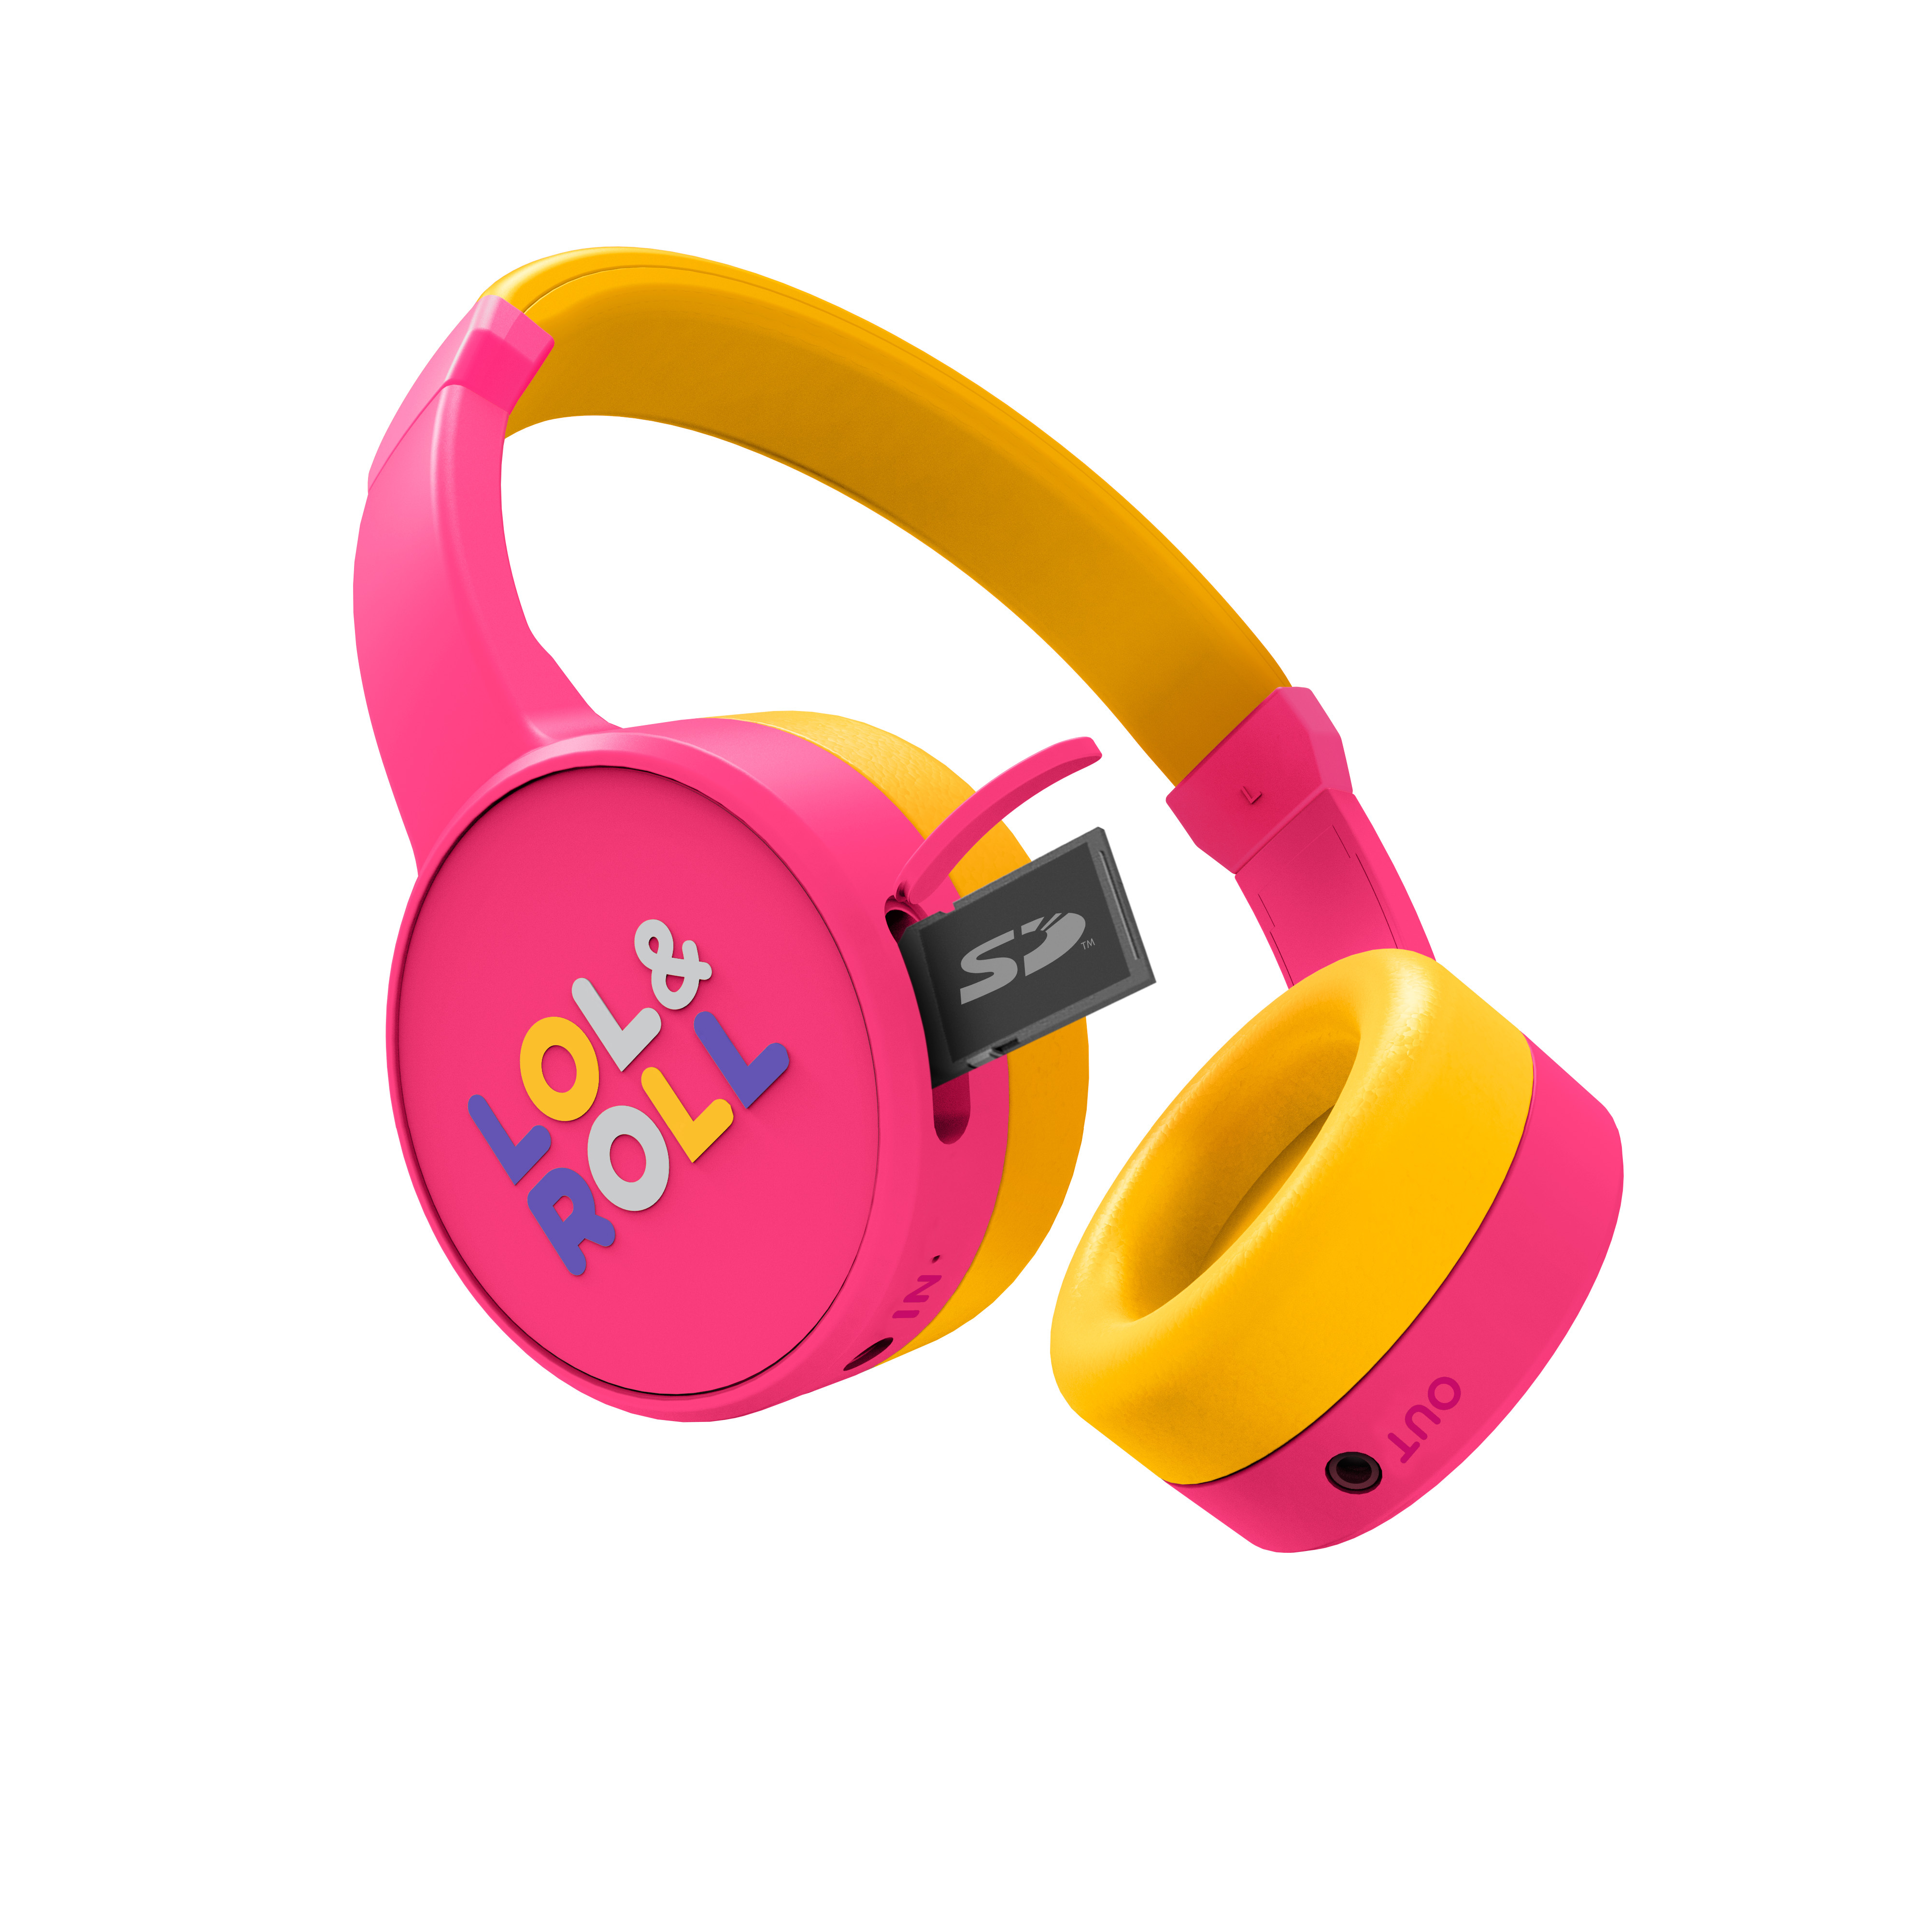 Bluetooth headset for kids to connect them to any smartphone